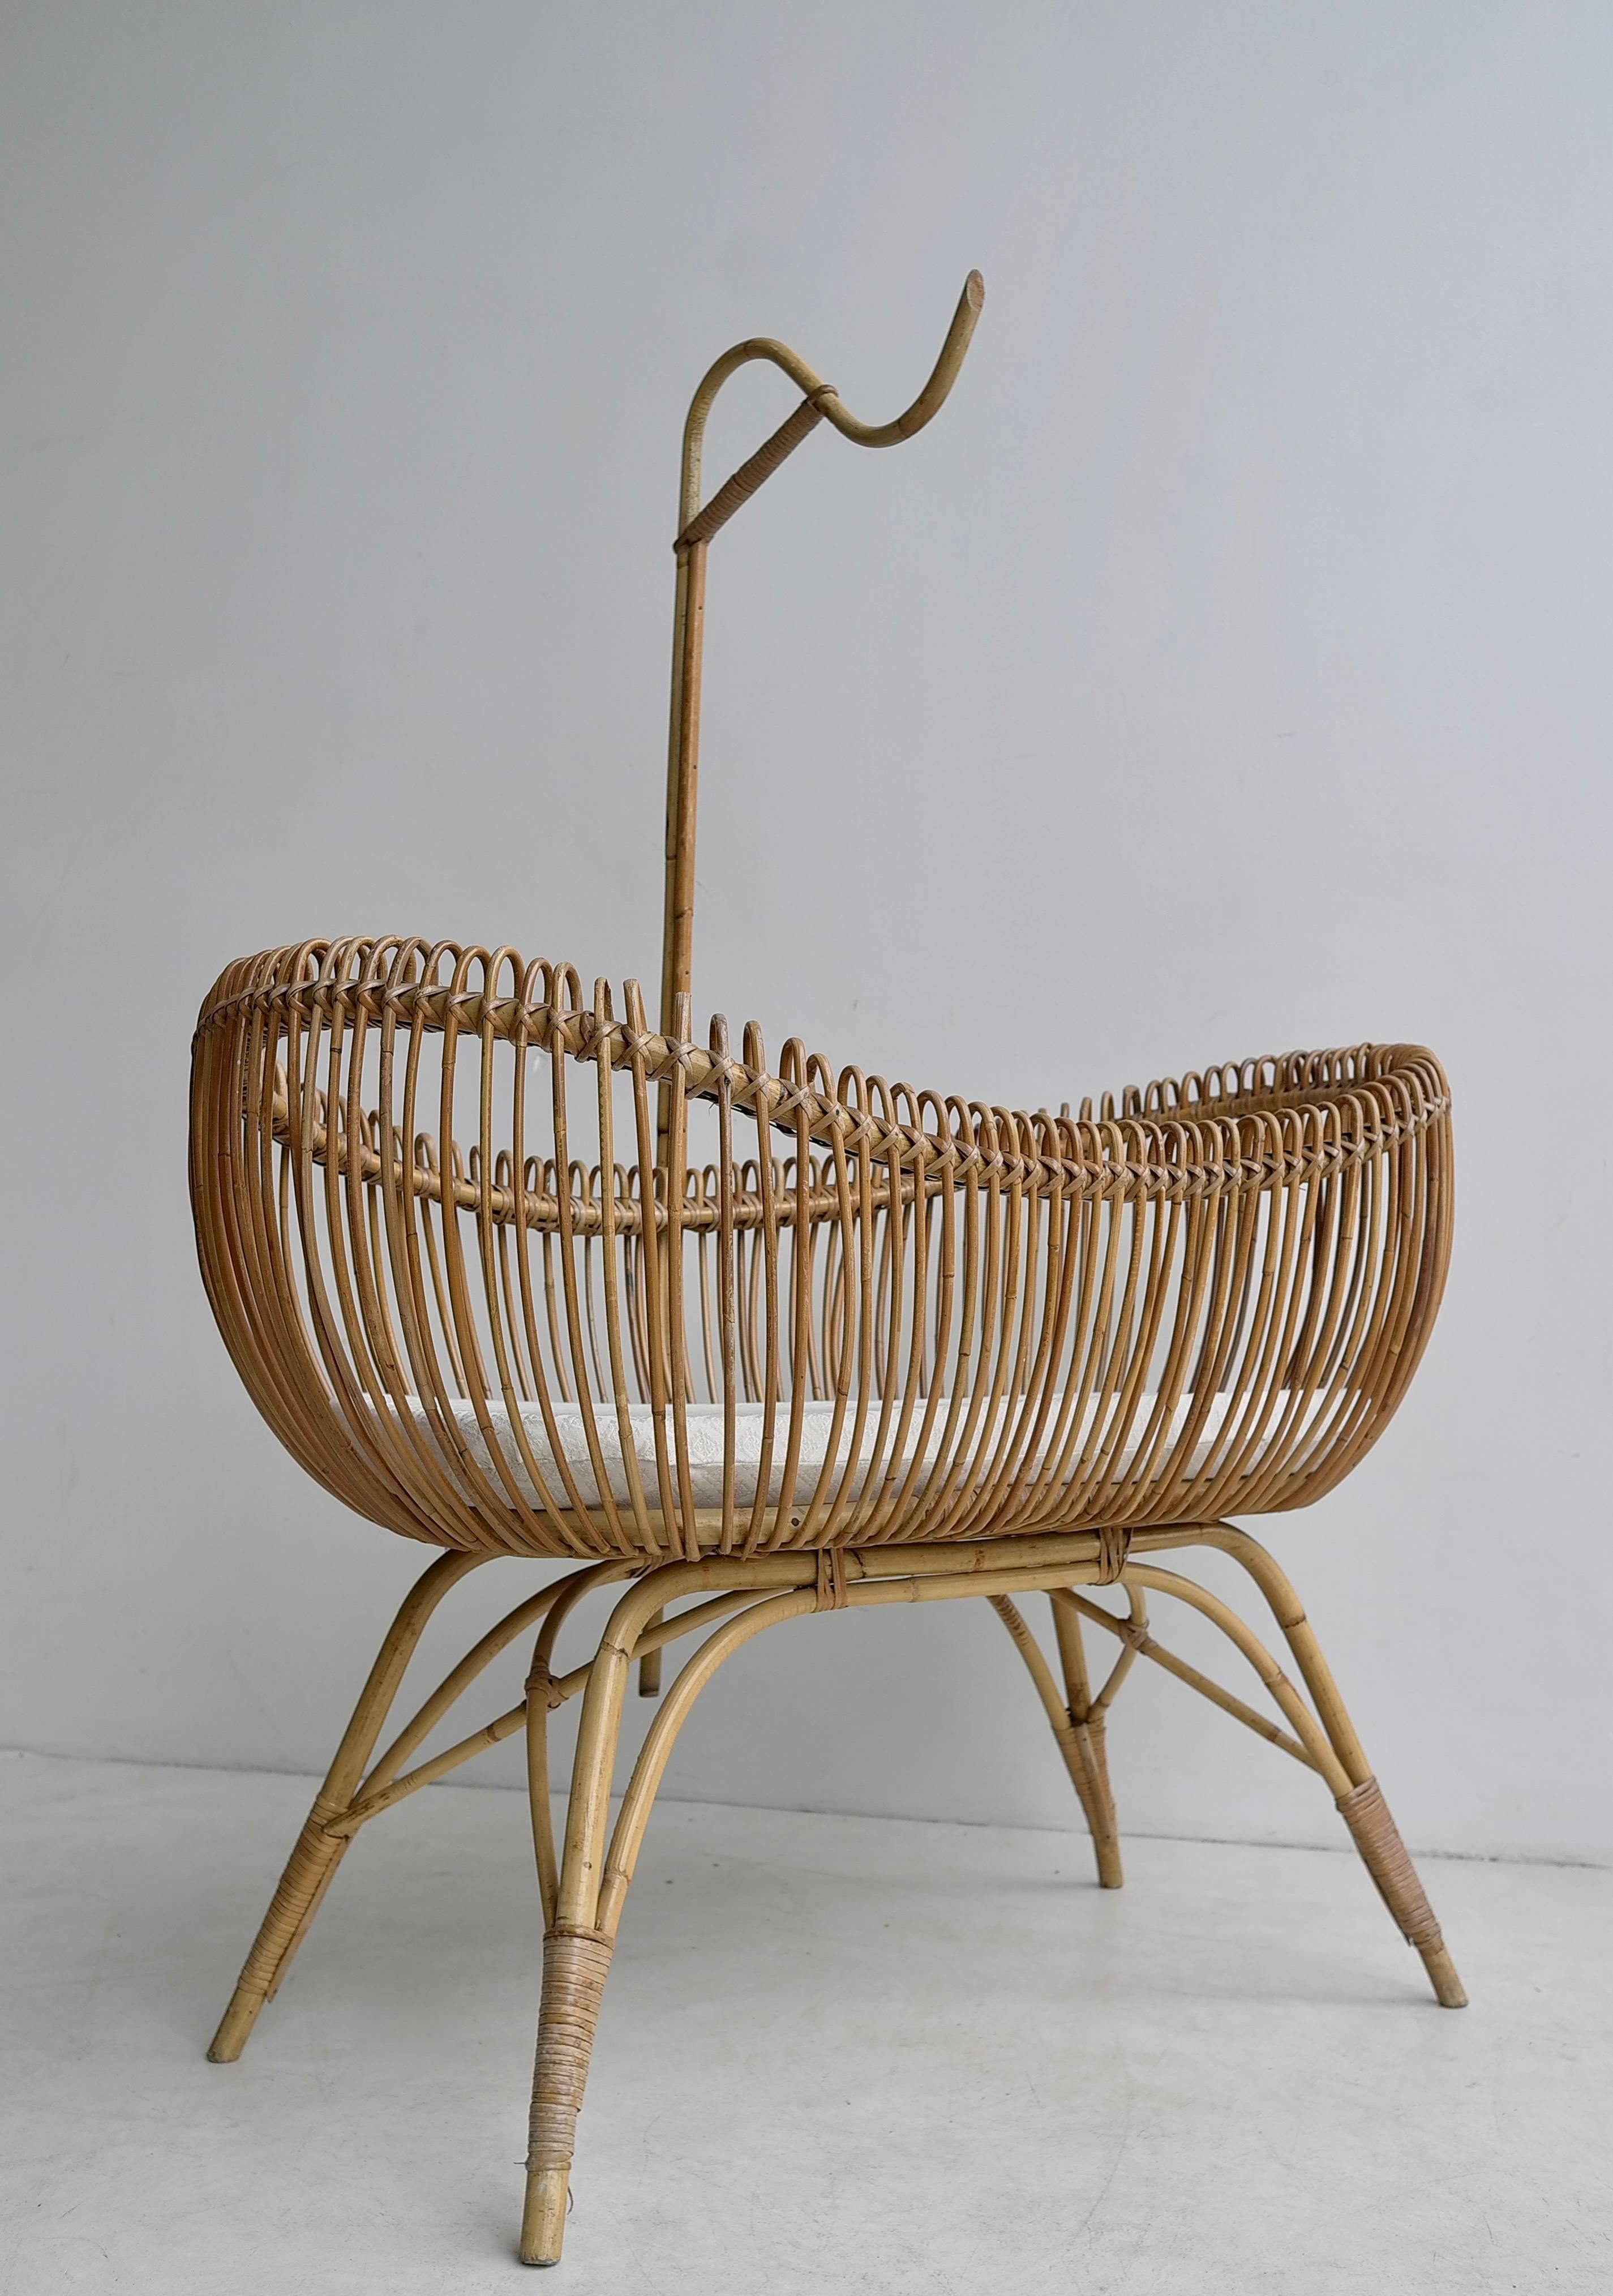 Bamboo Cradle in style of Franco Albini, Italy, 1950s.